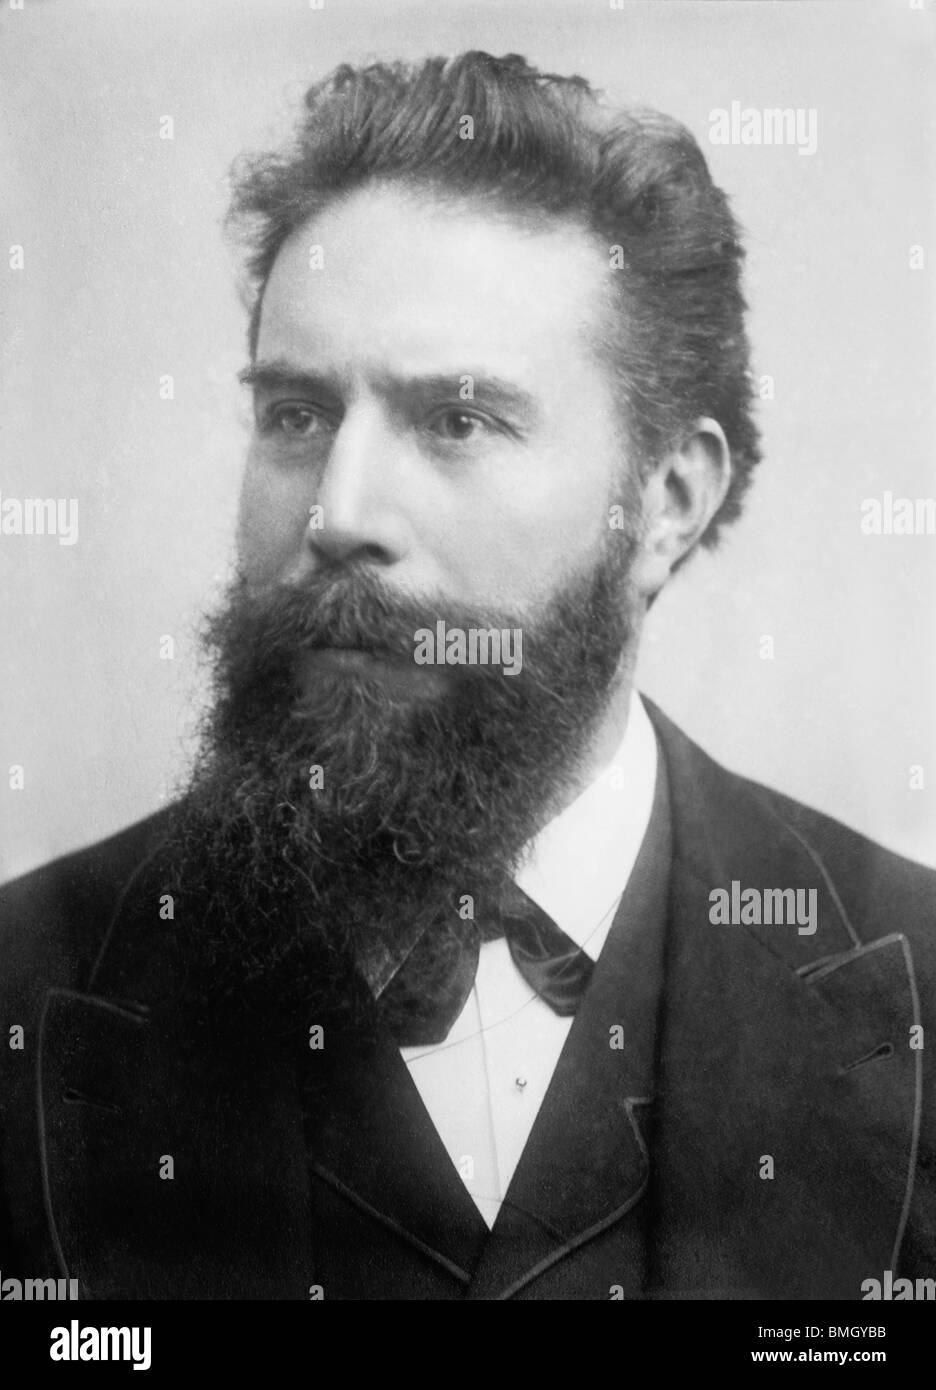 Undated portrait photo of German physicist Wilhelm Conrad Roentgen (1845 - 1923) - discoverer of x-rays and Nobel Prize winner. Stock Photo